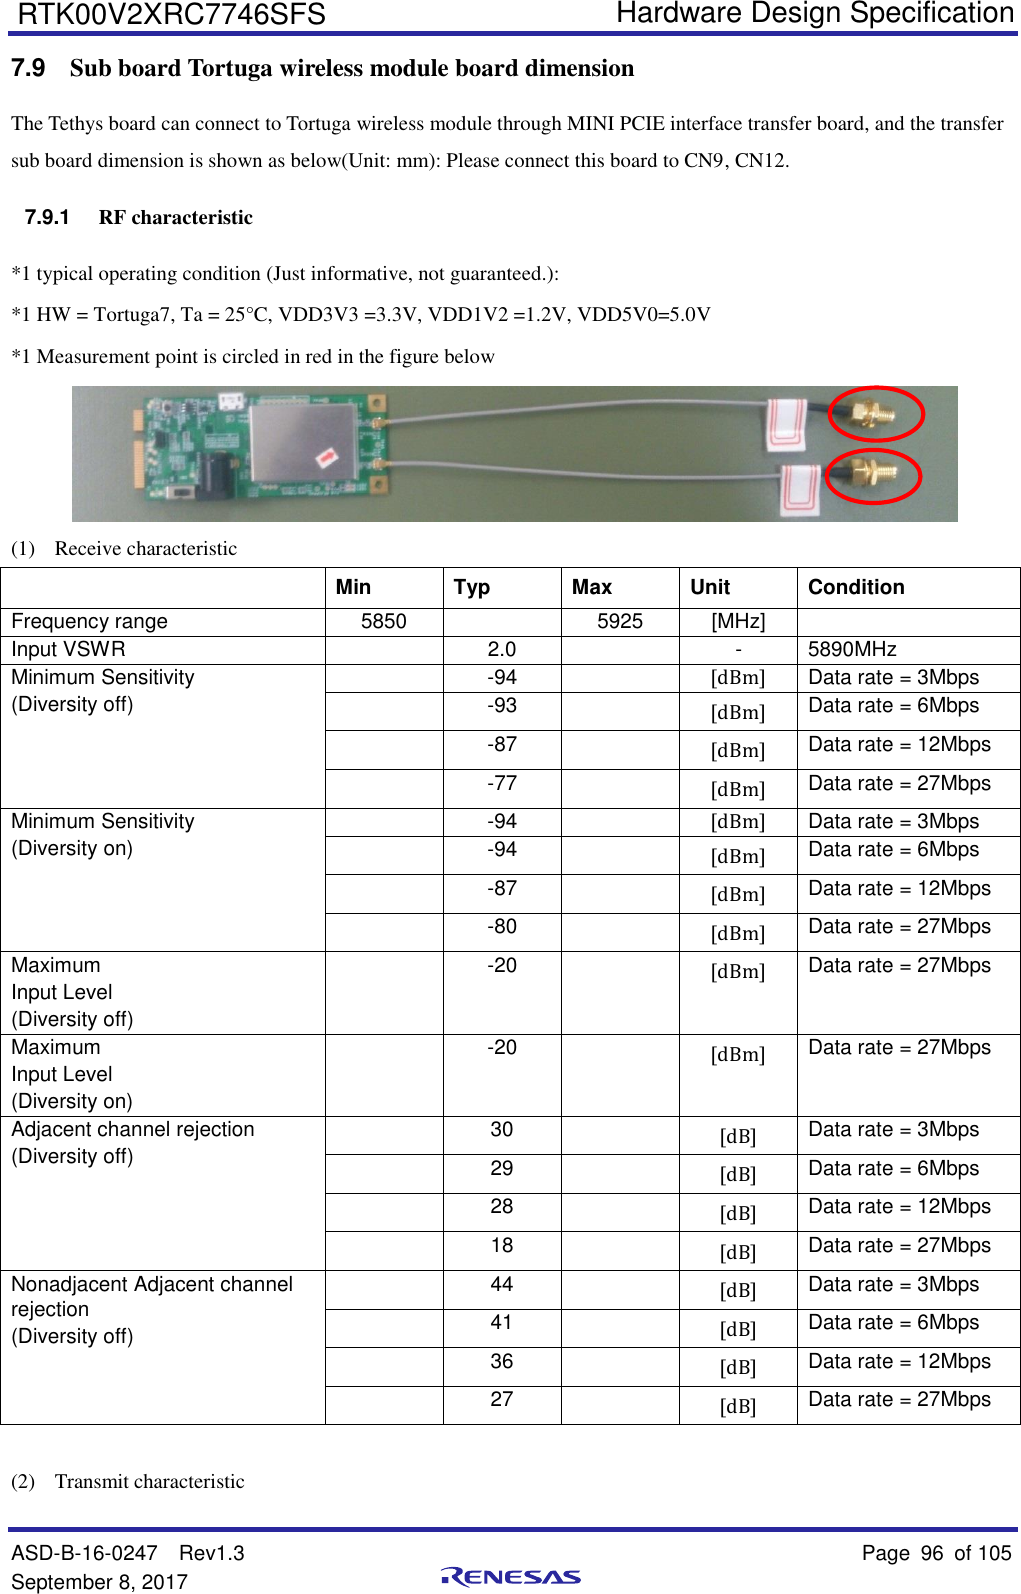   Hardware Design Specification ASD-B-16-0247  Rev1.3    Page 96  of 105 September 8, 2017      RTK00V2XRC7746SFS 7.9  Sub board Tortuga wireless module board dimension The Tethys board can connect to Tortuga wireless module through MINI PCIE interface transfer board, and the transfer sub board dimension is shown as below(Unit: mm): Please connect this board to CN9, CN12. 7.9.1 RF characteristic *1 typical operating condition (Just informative, not guaranteed.): *1 HW = Tortuga7, Ta = 25°C, VDD3V3 =3.3V, VDD1V2 =1.2V, VDD5V0=5.0V *1 Measurement point is circled in red in the figure below  (1)  Receive characteristic  Min Typ Max Unit Condition Frequency range 5850  5925 [MHz]  Input VSWR  2.0  - 5890MHz Minimum Sensitivity (Diversity off)  -94  [dBm] Data rate = 3Mbps  -93  [dBm] Data rate = 6Mbps  -87  [dBm] Data rate = 12Mbps  -77  [dBm] Data rate = 27Mbps Minimum Sensitivity (Diversity on)  -94  [dBm] Data rate = 3Mbps  -94  [dBm] Data rate = 6Mbps  -87  [dBm] Data rate = 12Mbps  -80  [dBm] Data rate = 27Mbps Maximum   Input Level   (Diversity off)  -20  [dBm] Data rate = 27Mbps Maximum   Input Level   (Diversity on)  -20  [dBm] Data rate = 27Mbps Adjacent channel rejection (Diversity off)  30  [dB] Data rate = 3Mbps  29  [dB] Data rate = 6Mbps  28  [dB] Data rate = 12Mbps  18  [dB] Data rate = 27Mbps Nonadjacent Adjacent channel rejection (Diversity off)  44  [dB] Data rate = 3Mbps  41  [dB] Data rate = 6Mbps  36  [dB] Data rate = 12Mbps  27  [dB] Data rate = 27Mbps    (2)  Transmit characteristic 